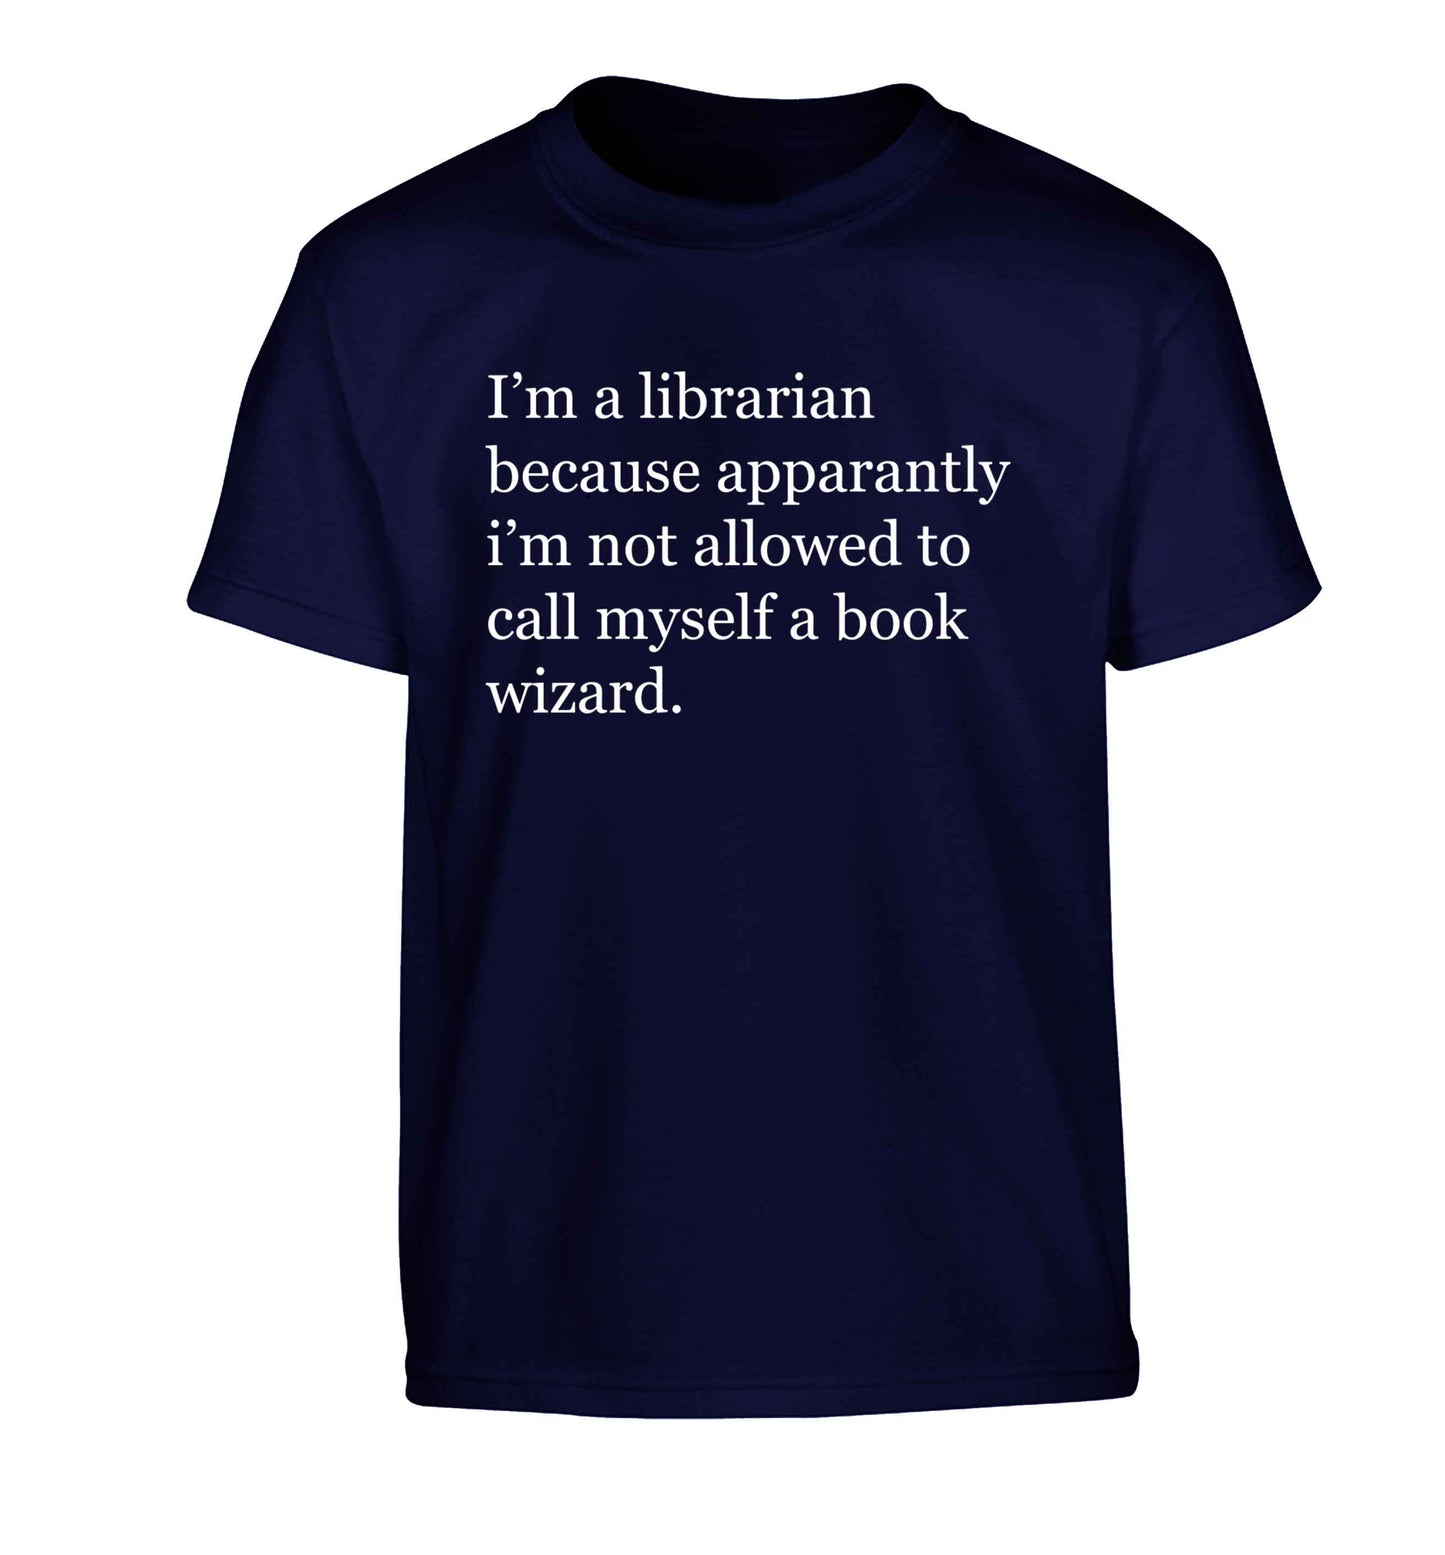 iÕm a librarian because apparantly iÕm not allowed to call myself a book wizard Children's navy Tshirt 12-13 Years